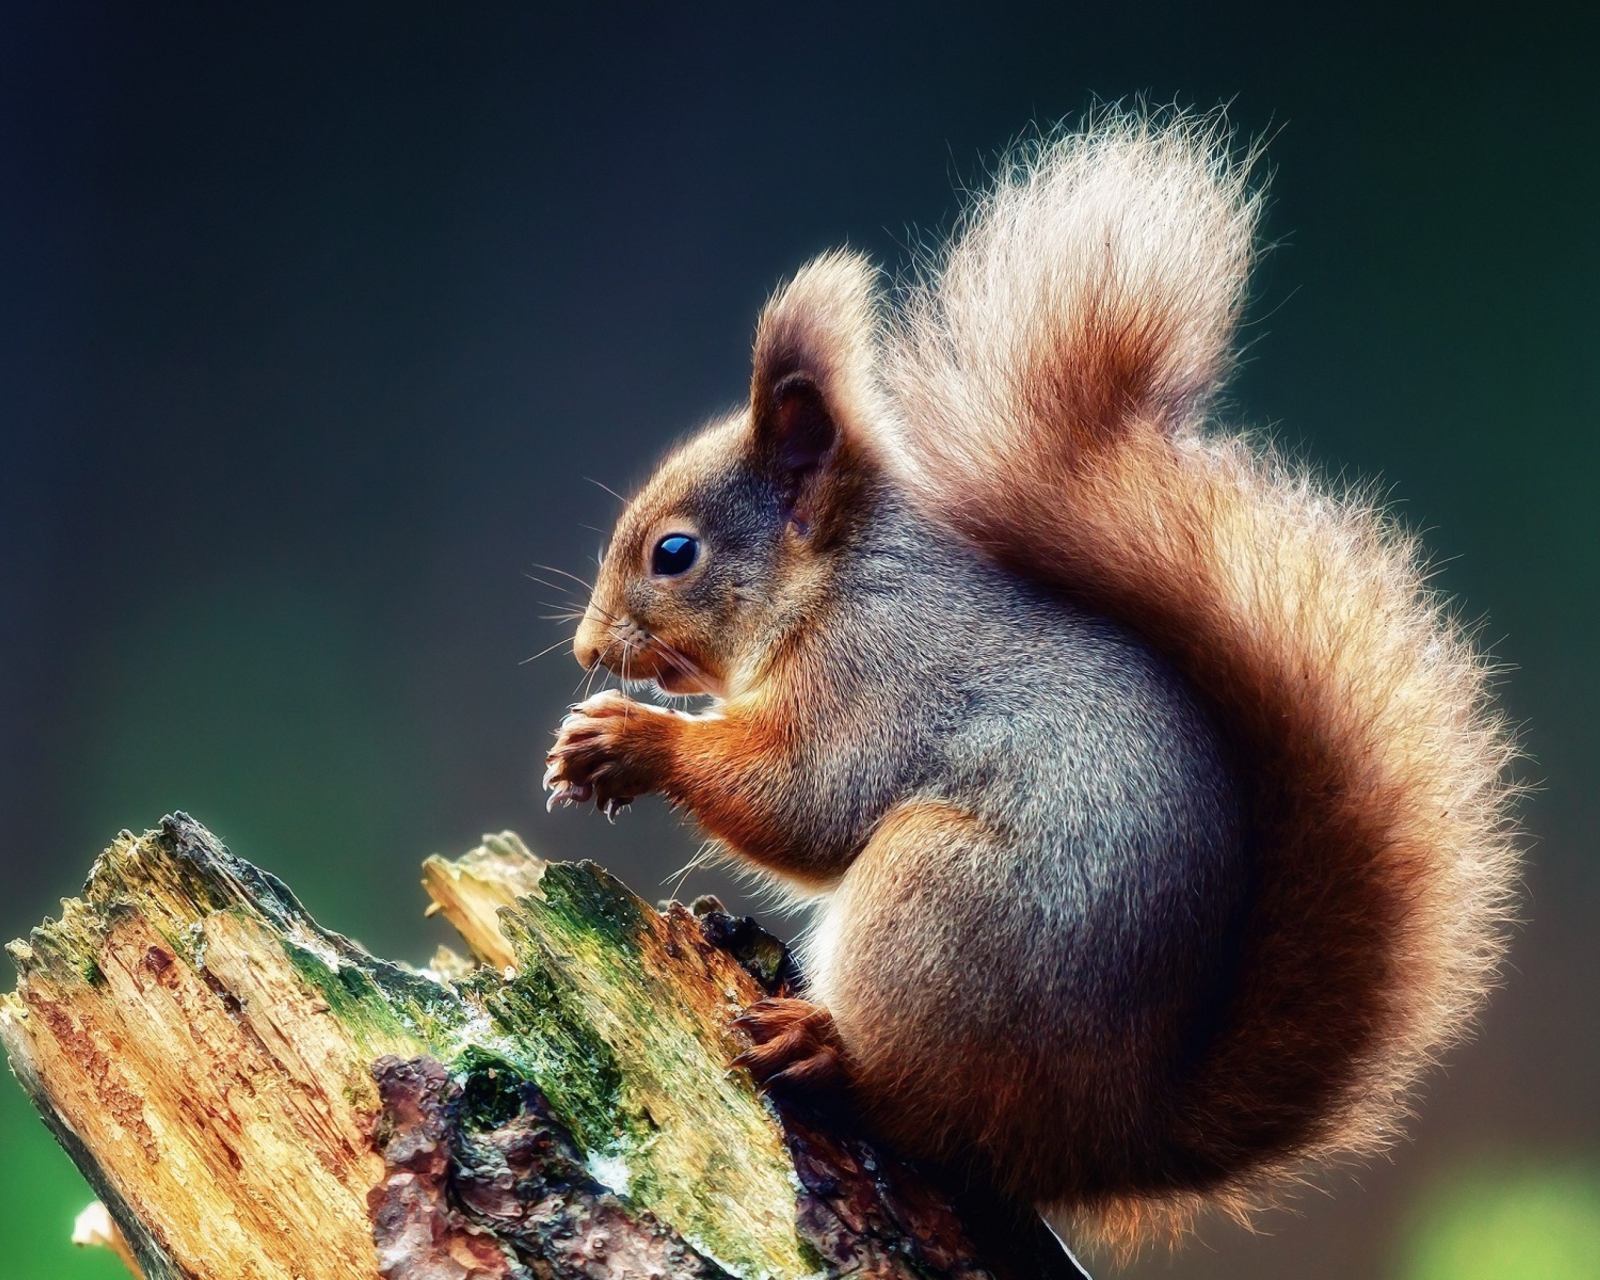 Squirrel Eating A Nut wallpaper 1600x1280